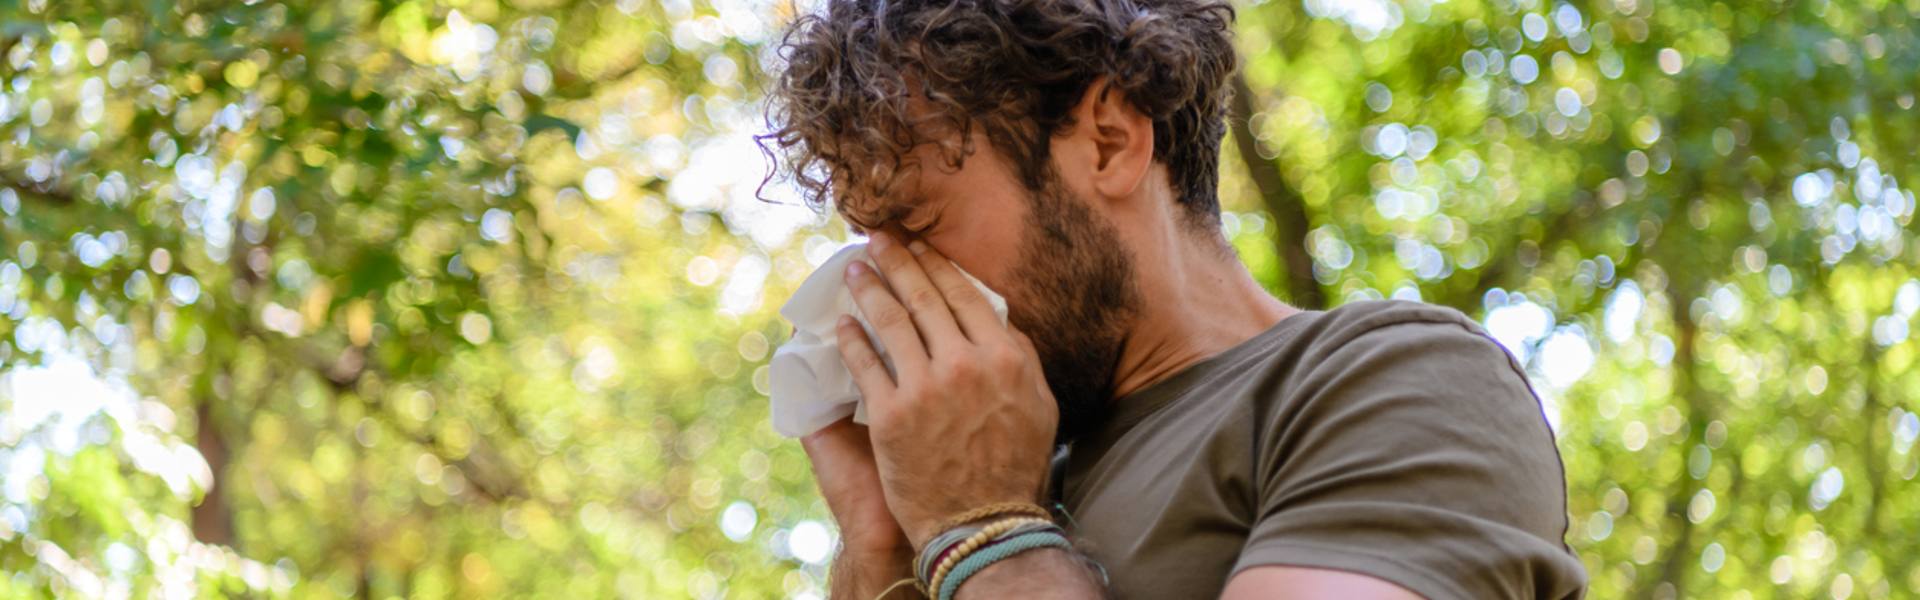 a man sneezing into a tissue whilst outdoors